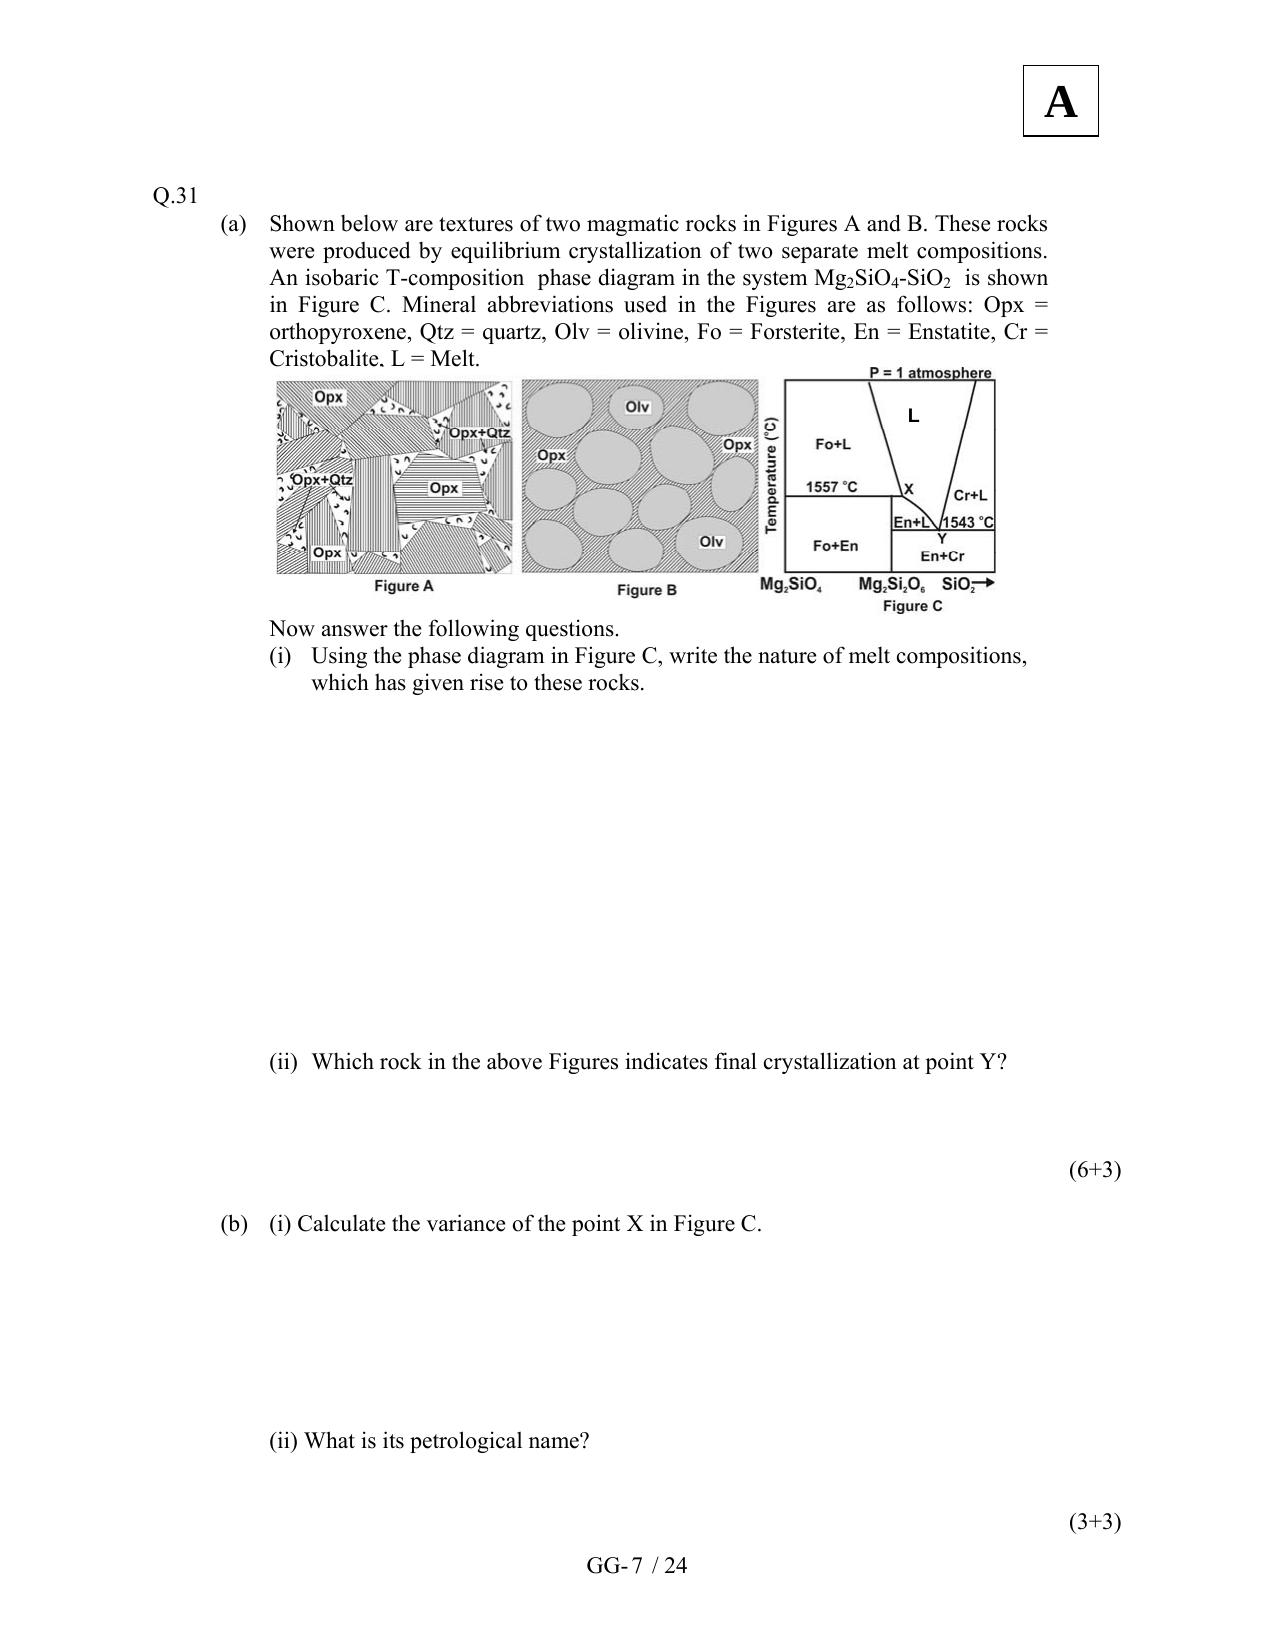 JAM 2012: GG Question Paper - Page 9